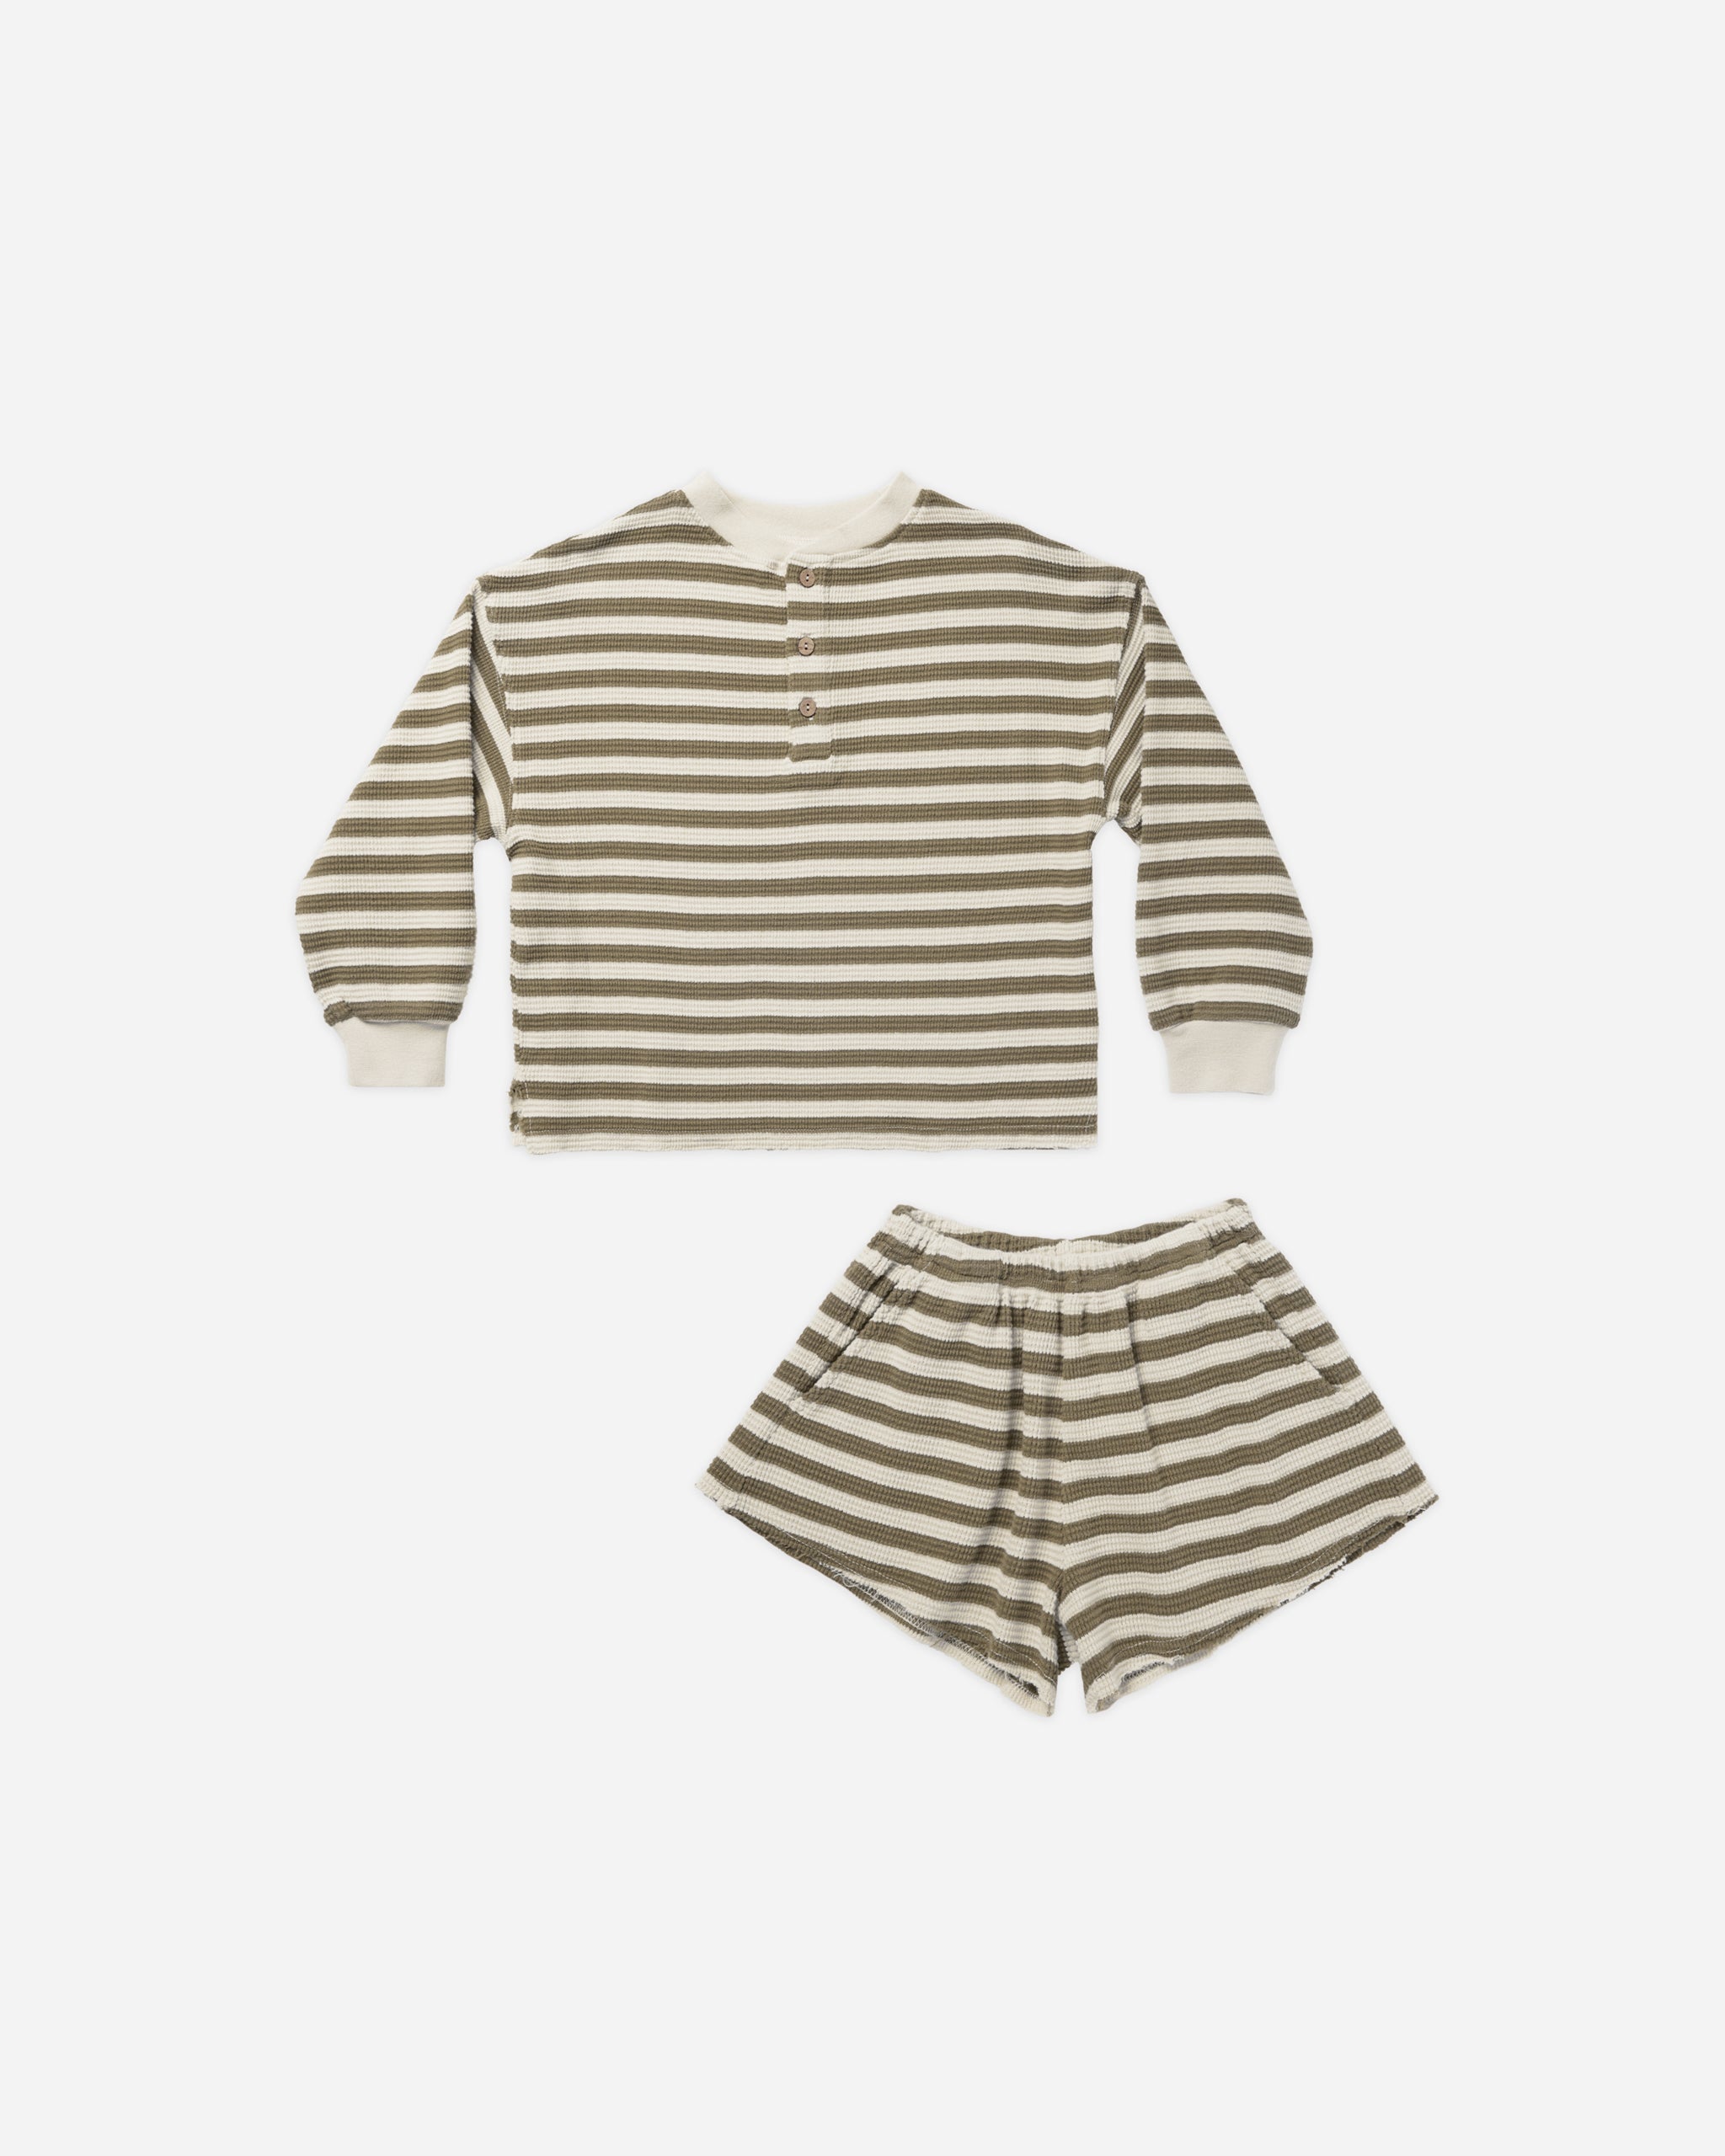 Waffle Knit Set || Moss Stripe - Rylee + Cru | Kids Clothes | Trendy Baby Clothes | Modern Infant Outfits |